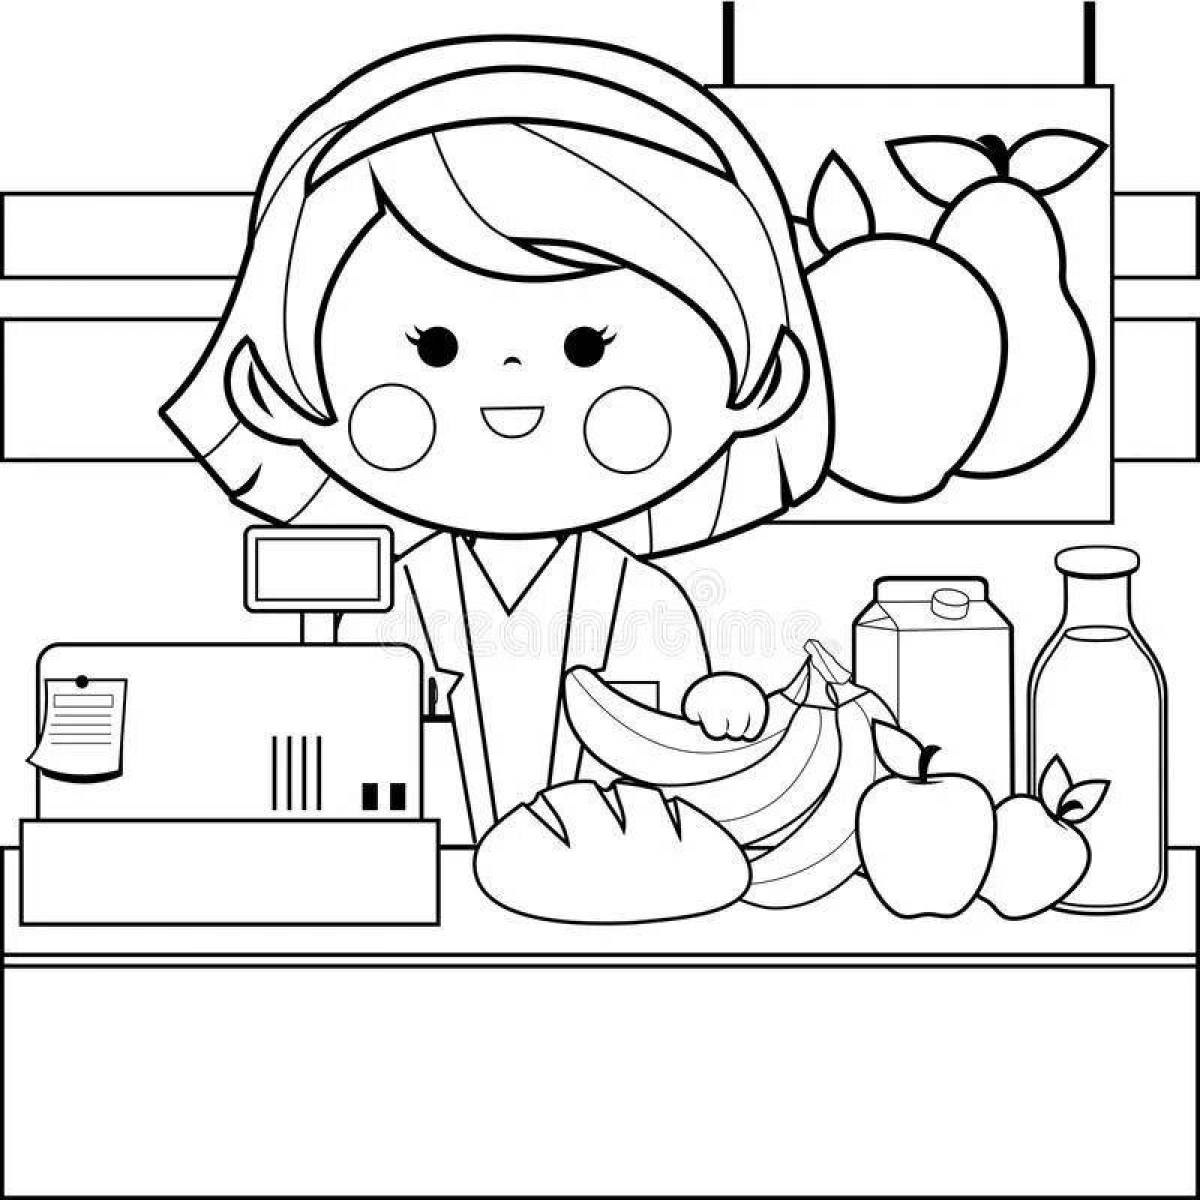 Animated sales profession coloring page